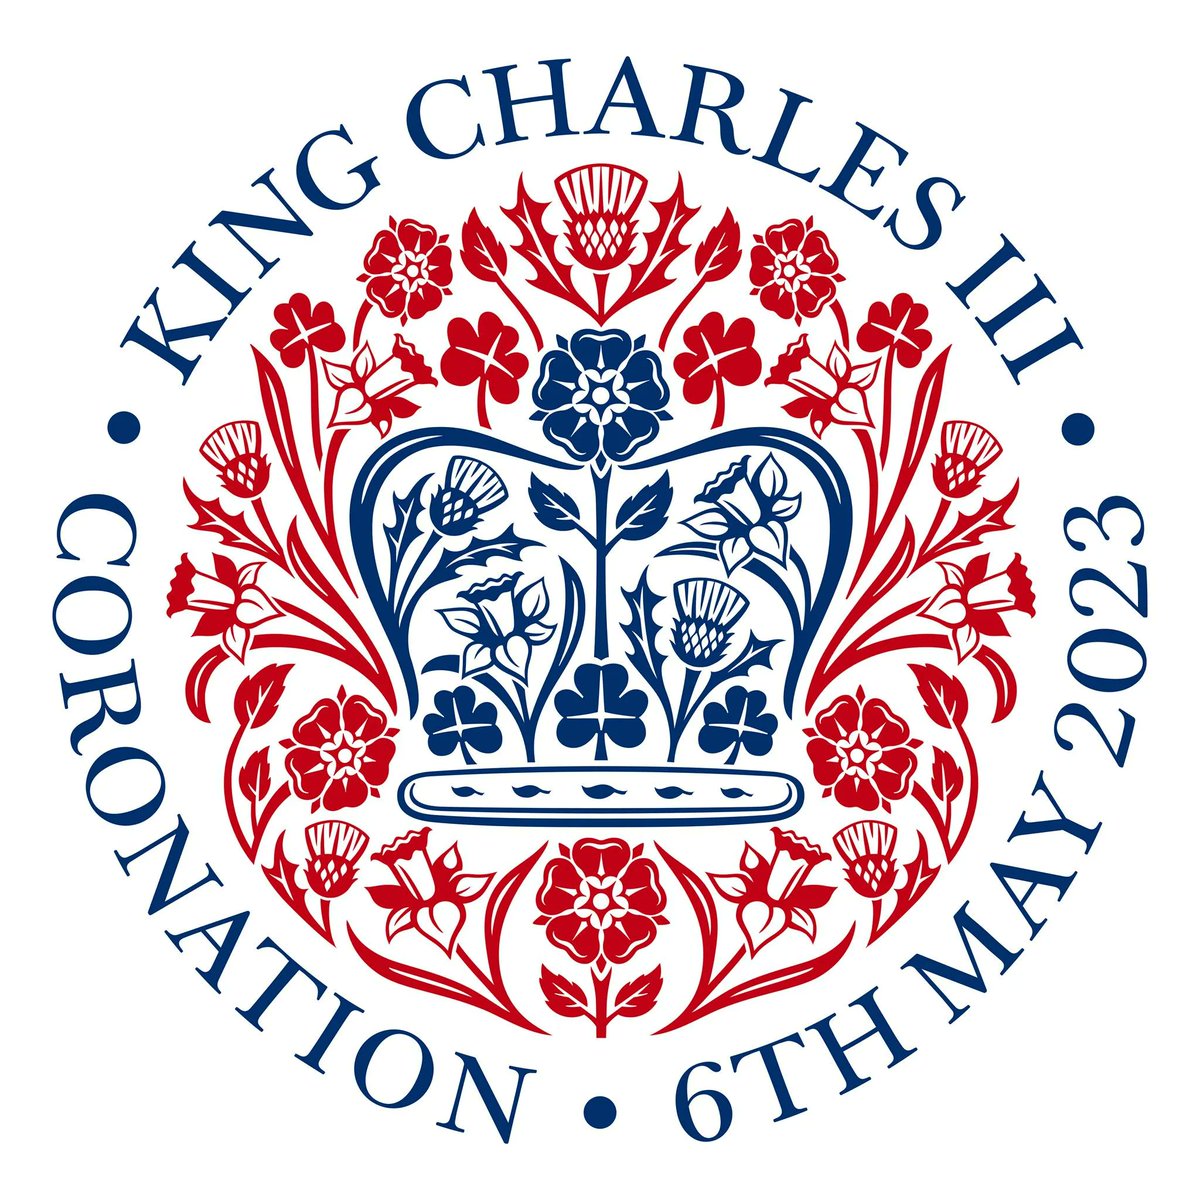 Congratulations to King Charles III & Queen Camilla on their #Coronation. The Royal Family have a long & proud connection to lifesaving. In1962 King Charles undertook his Royal Life Saving Society training. Australia joins other Commonwealth countries celebrating this special day